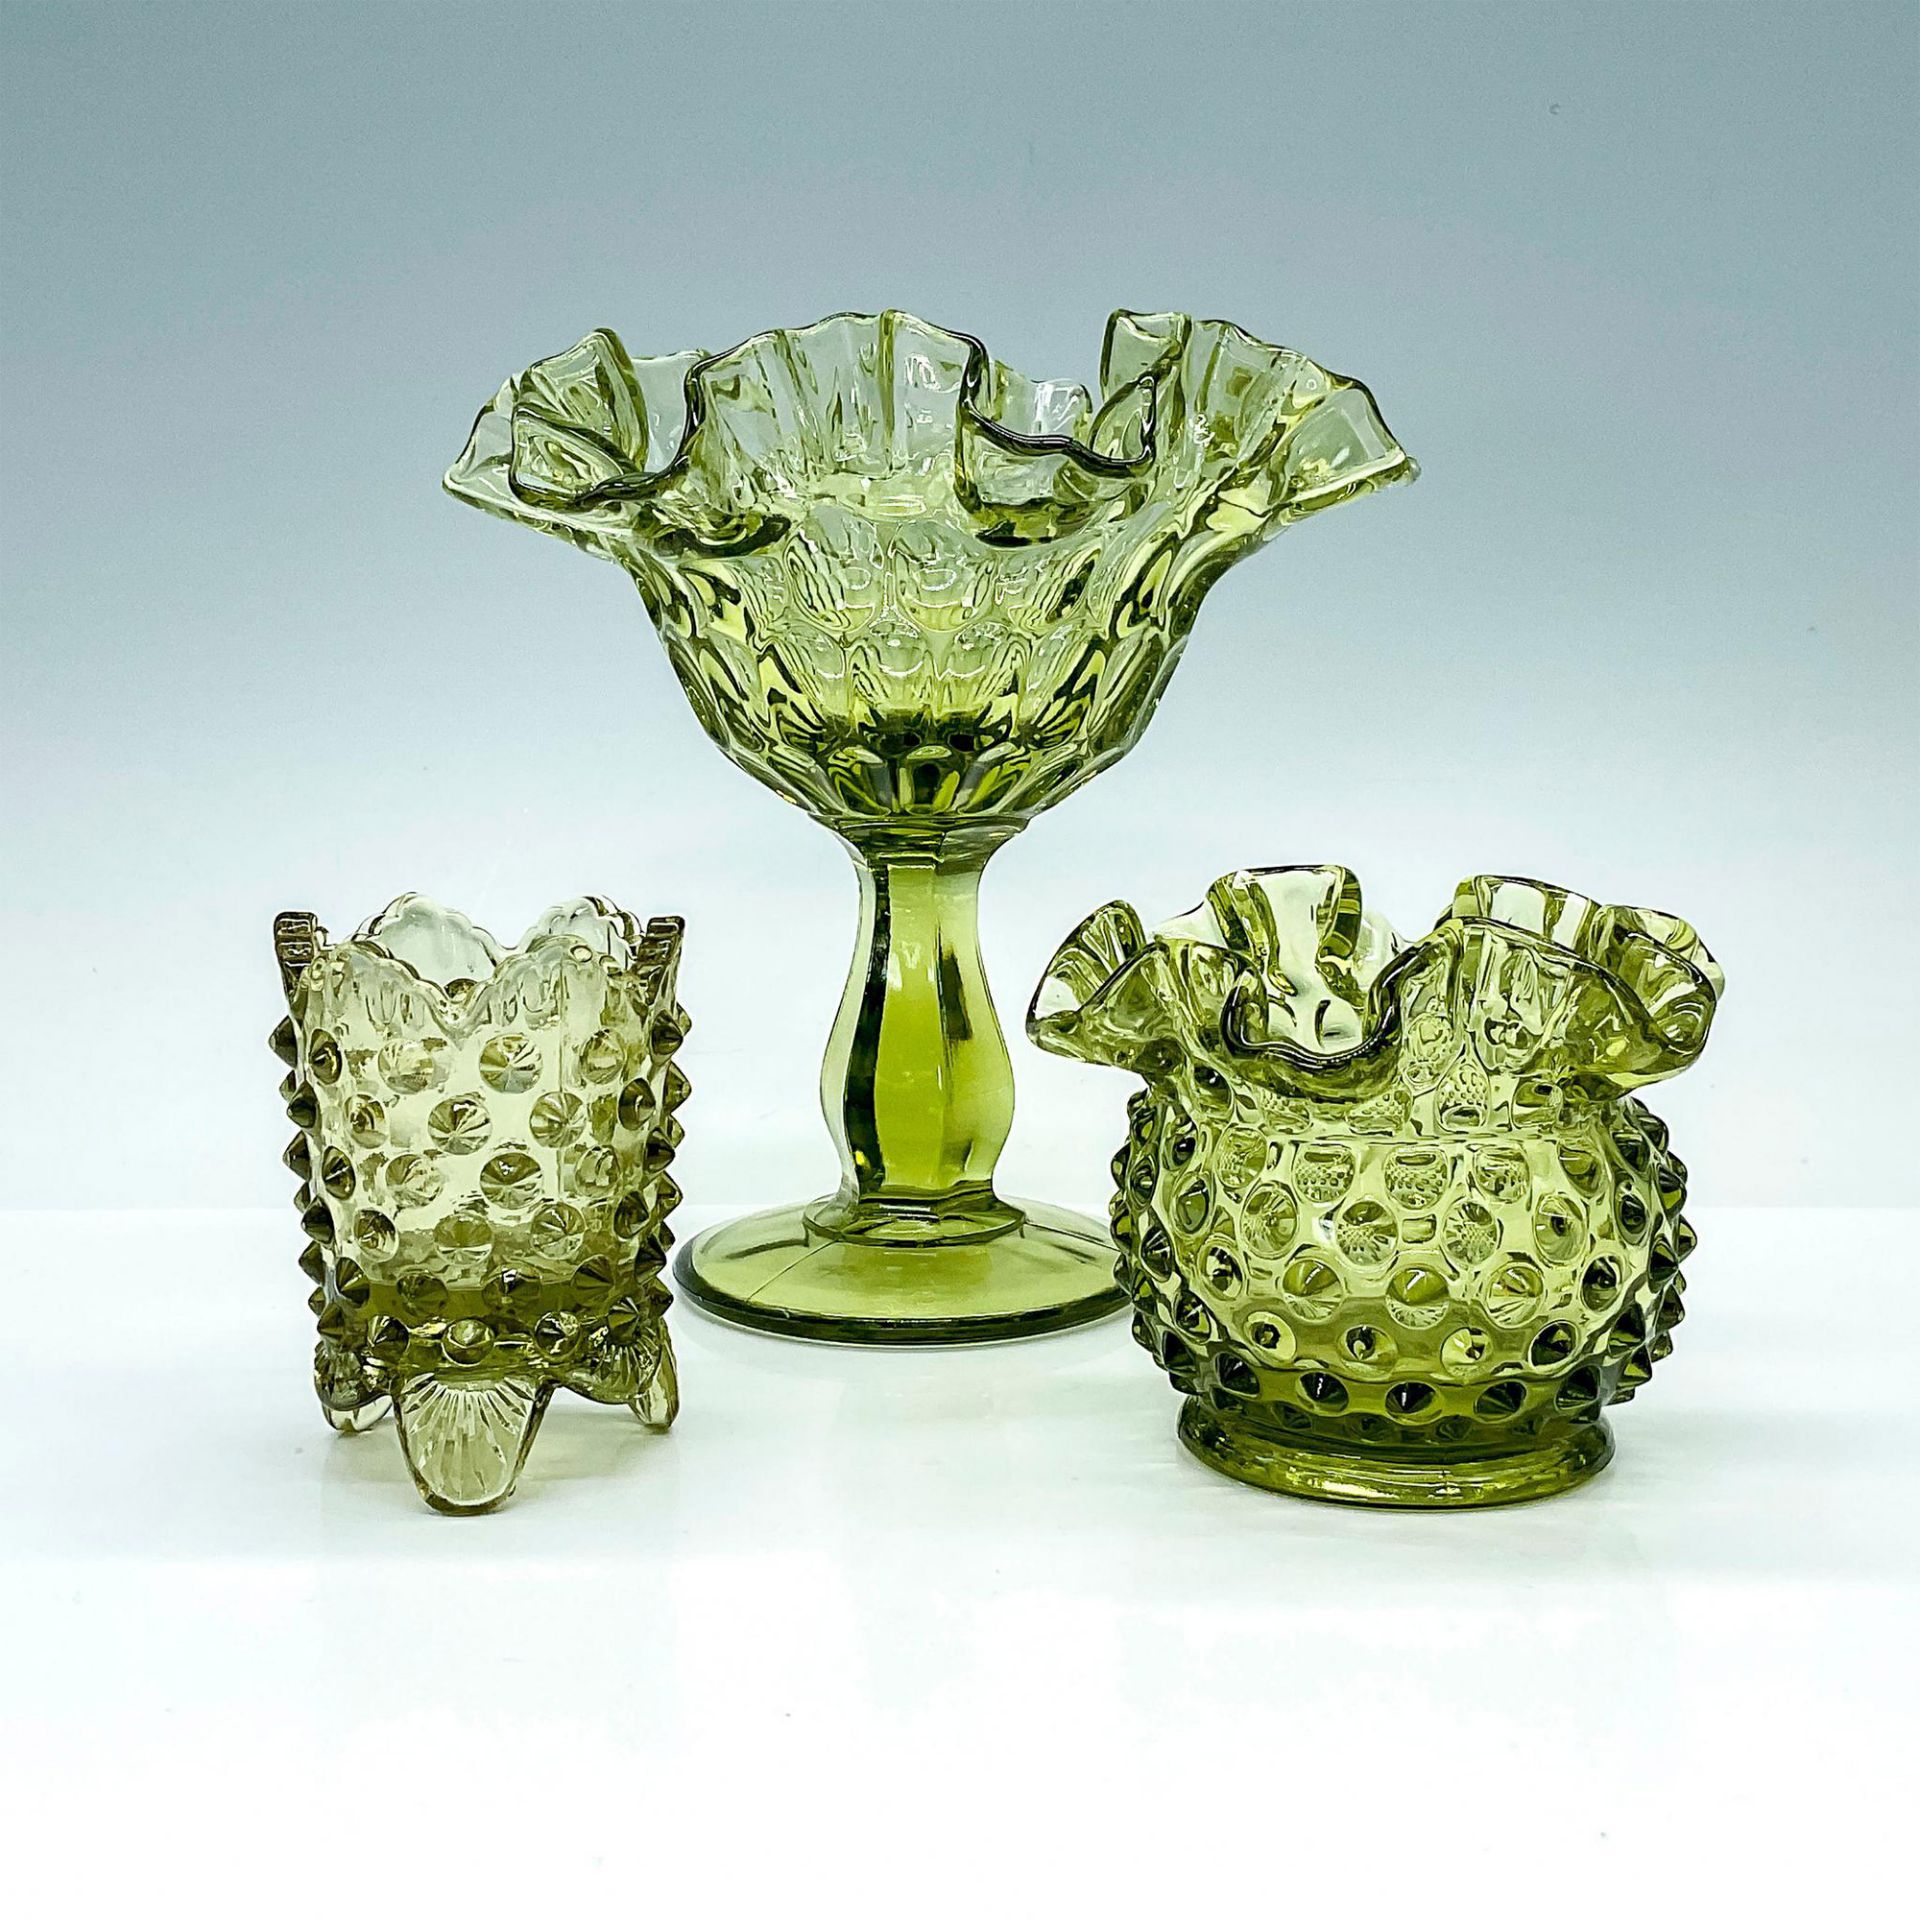 3pc Vintage Green Hobnail Glass Dishes - Image 2 of 3